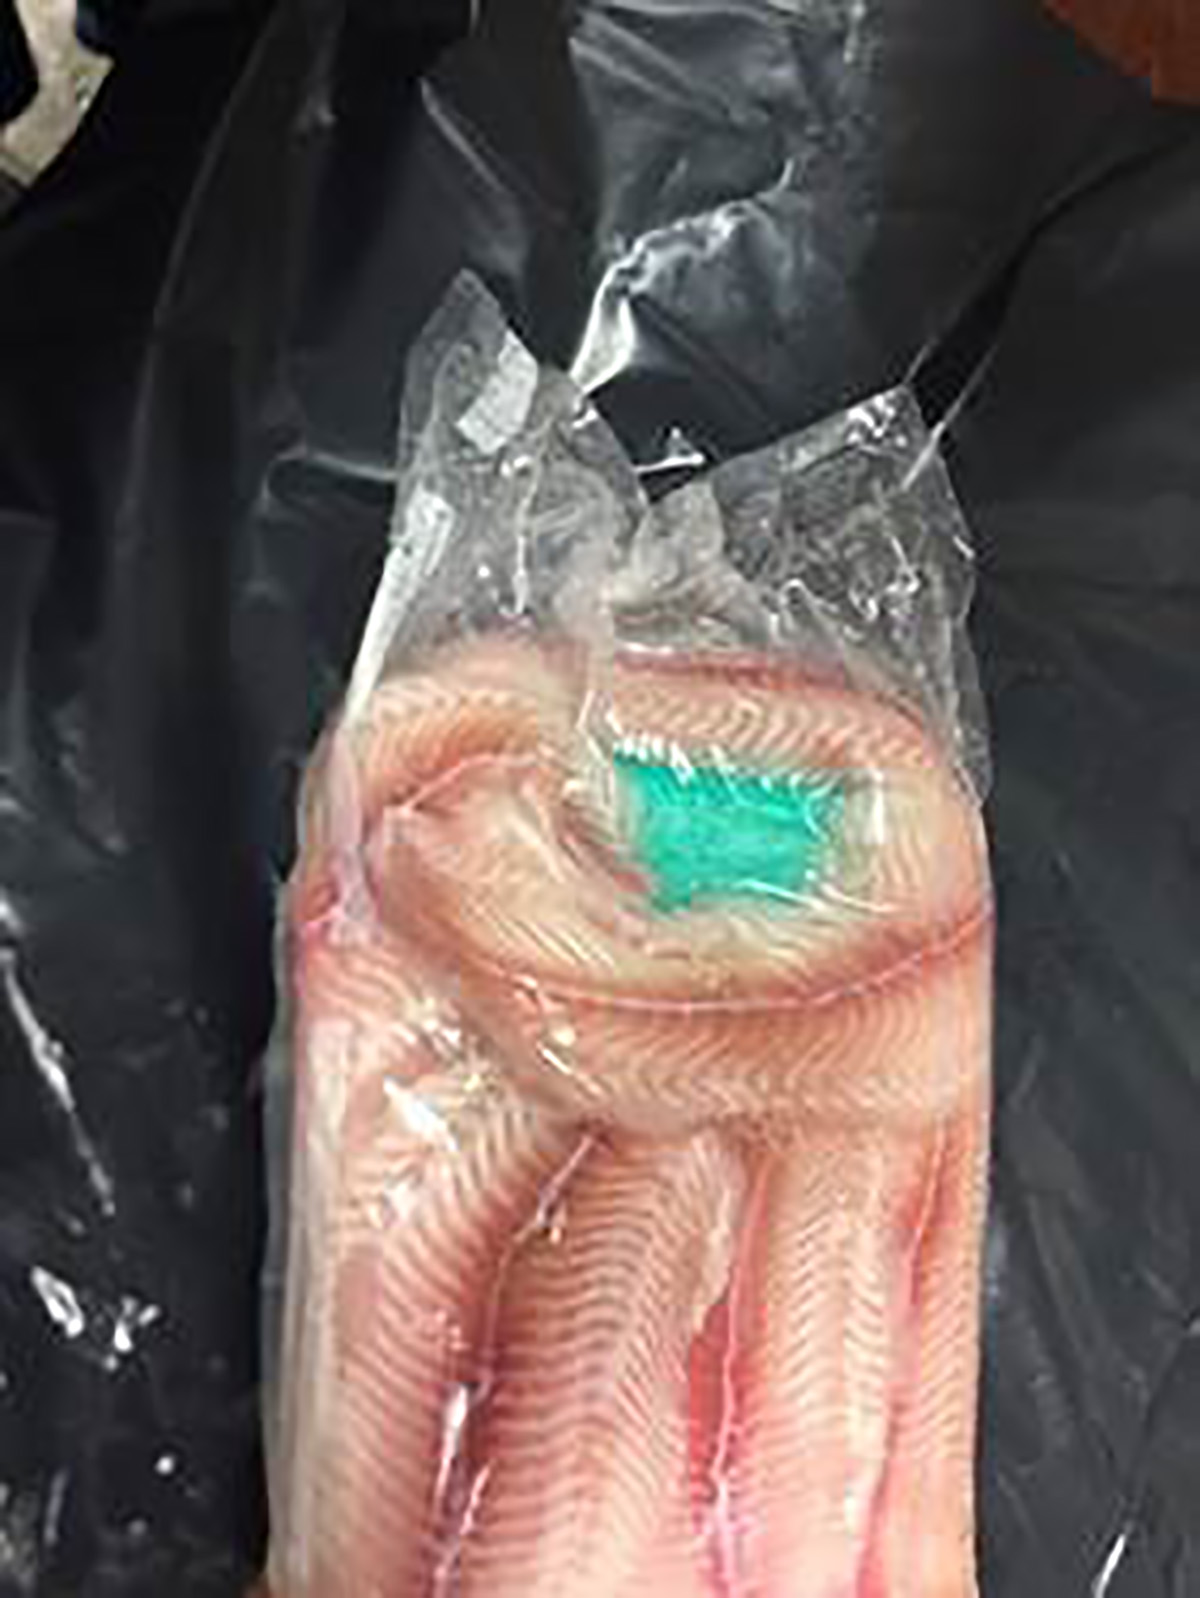 PHOTO: An estimated $10 million dollars worth of fentanyl wrapped in fish was confiscated in New York City, according to the Office of Special Narcotics Prosecutor for the City of New York (SNPNYC).